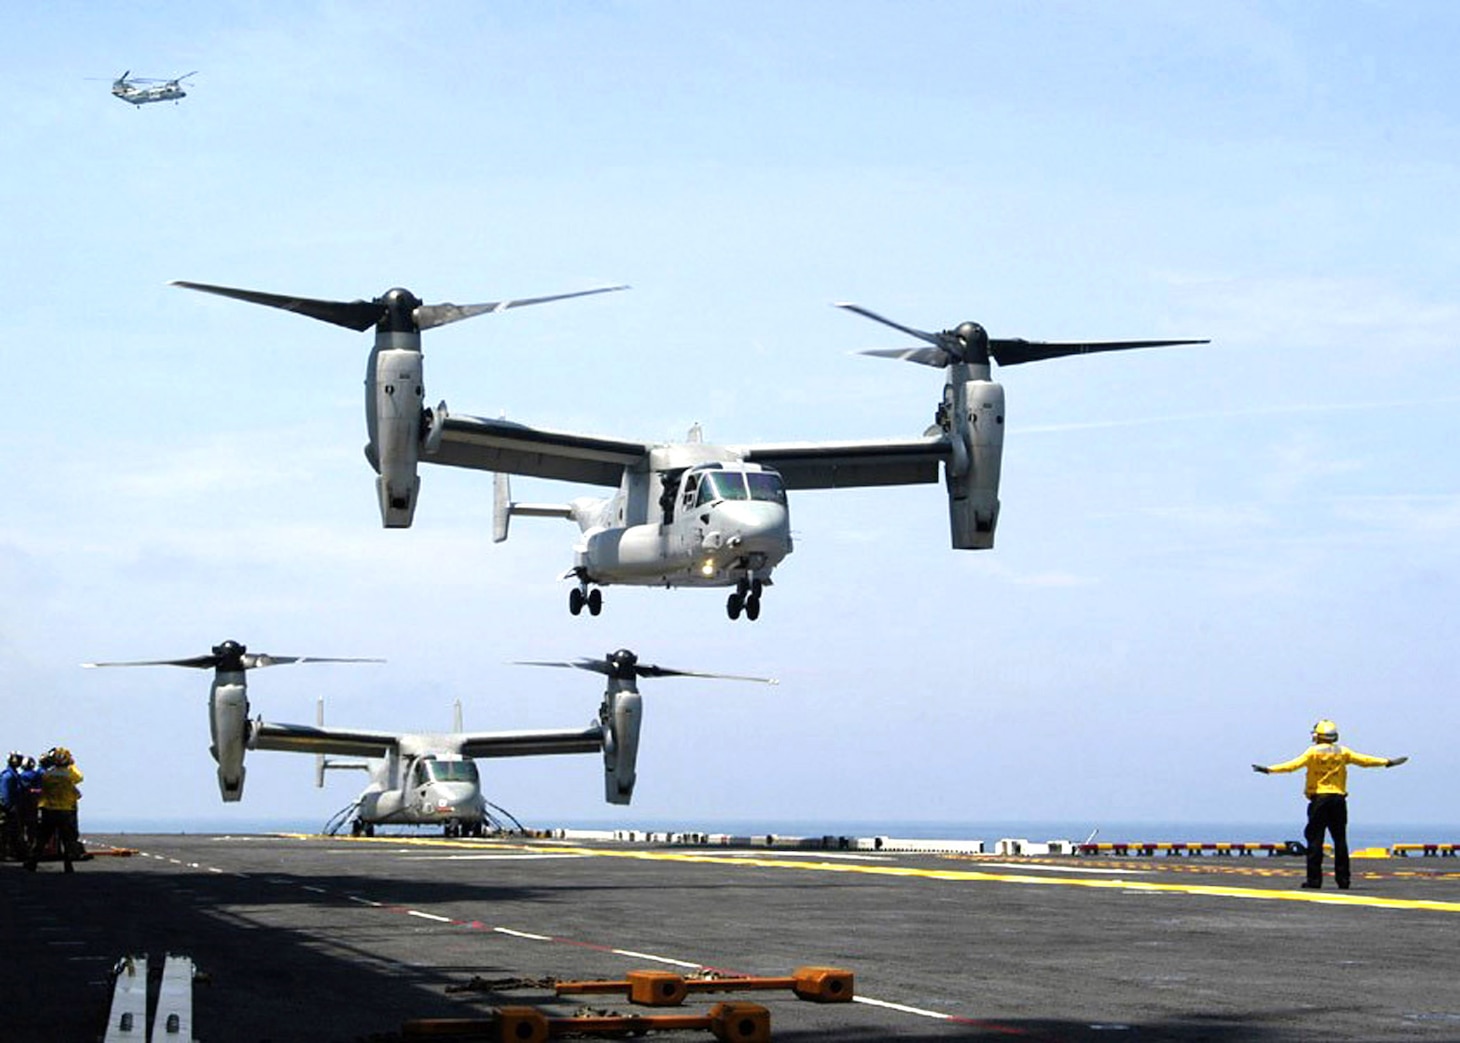 V-22 Osprey aircraft operate in close proximity during recent flight deck developmental testing aboard the amphibious assault ship USS Iwo Jima (LHD 7). The Osprey is a tilt-rotor vertical/short takeoff and landing (VSTOL), multi-mission aircraft developed to fill multi-Service combat operational requirements worldwide.